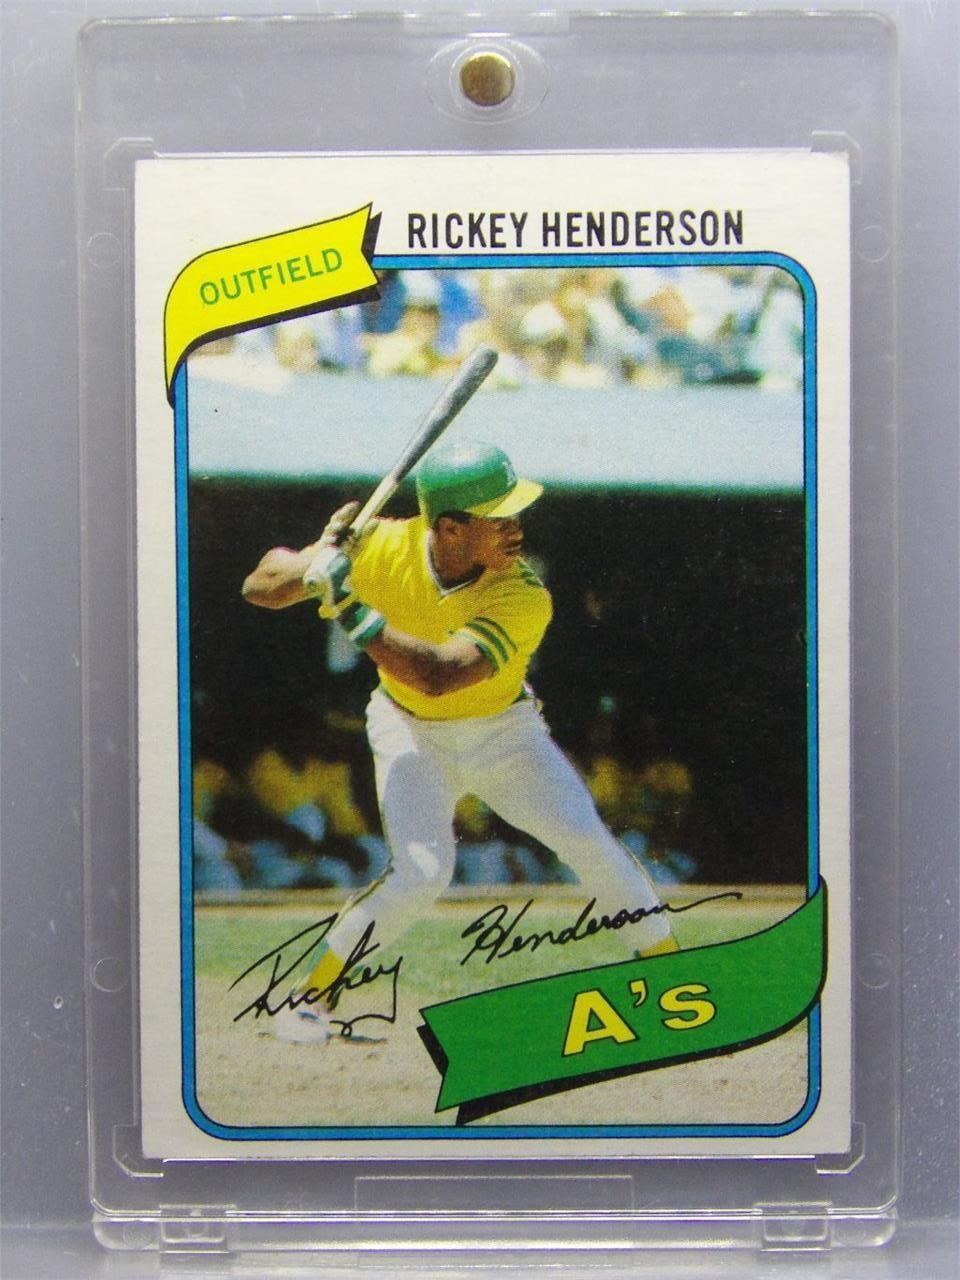 Great Vintage Modern Sports Cards July 21st at 7:00 Central